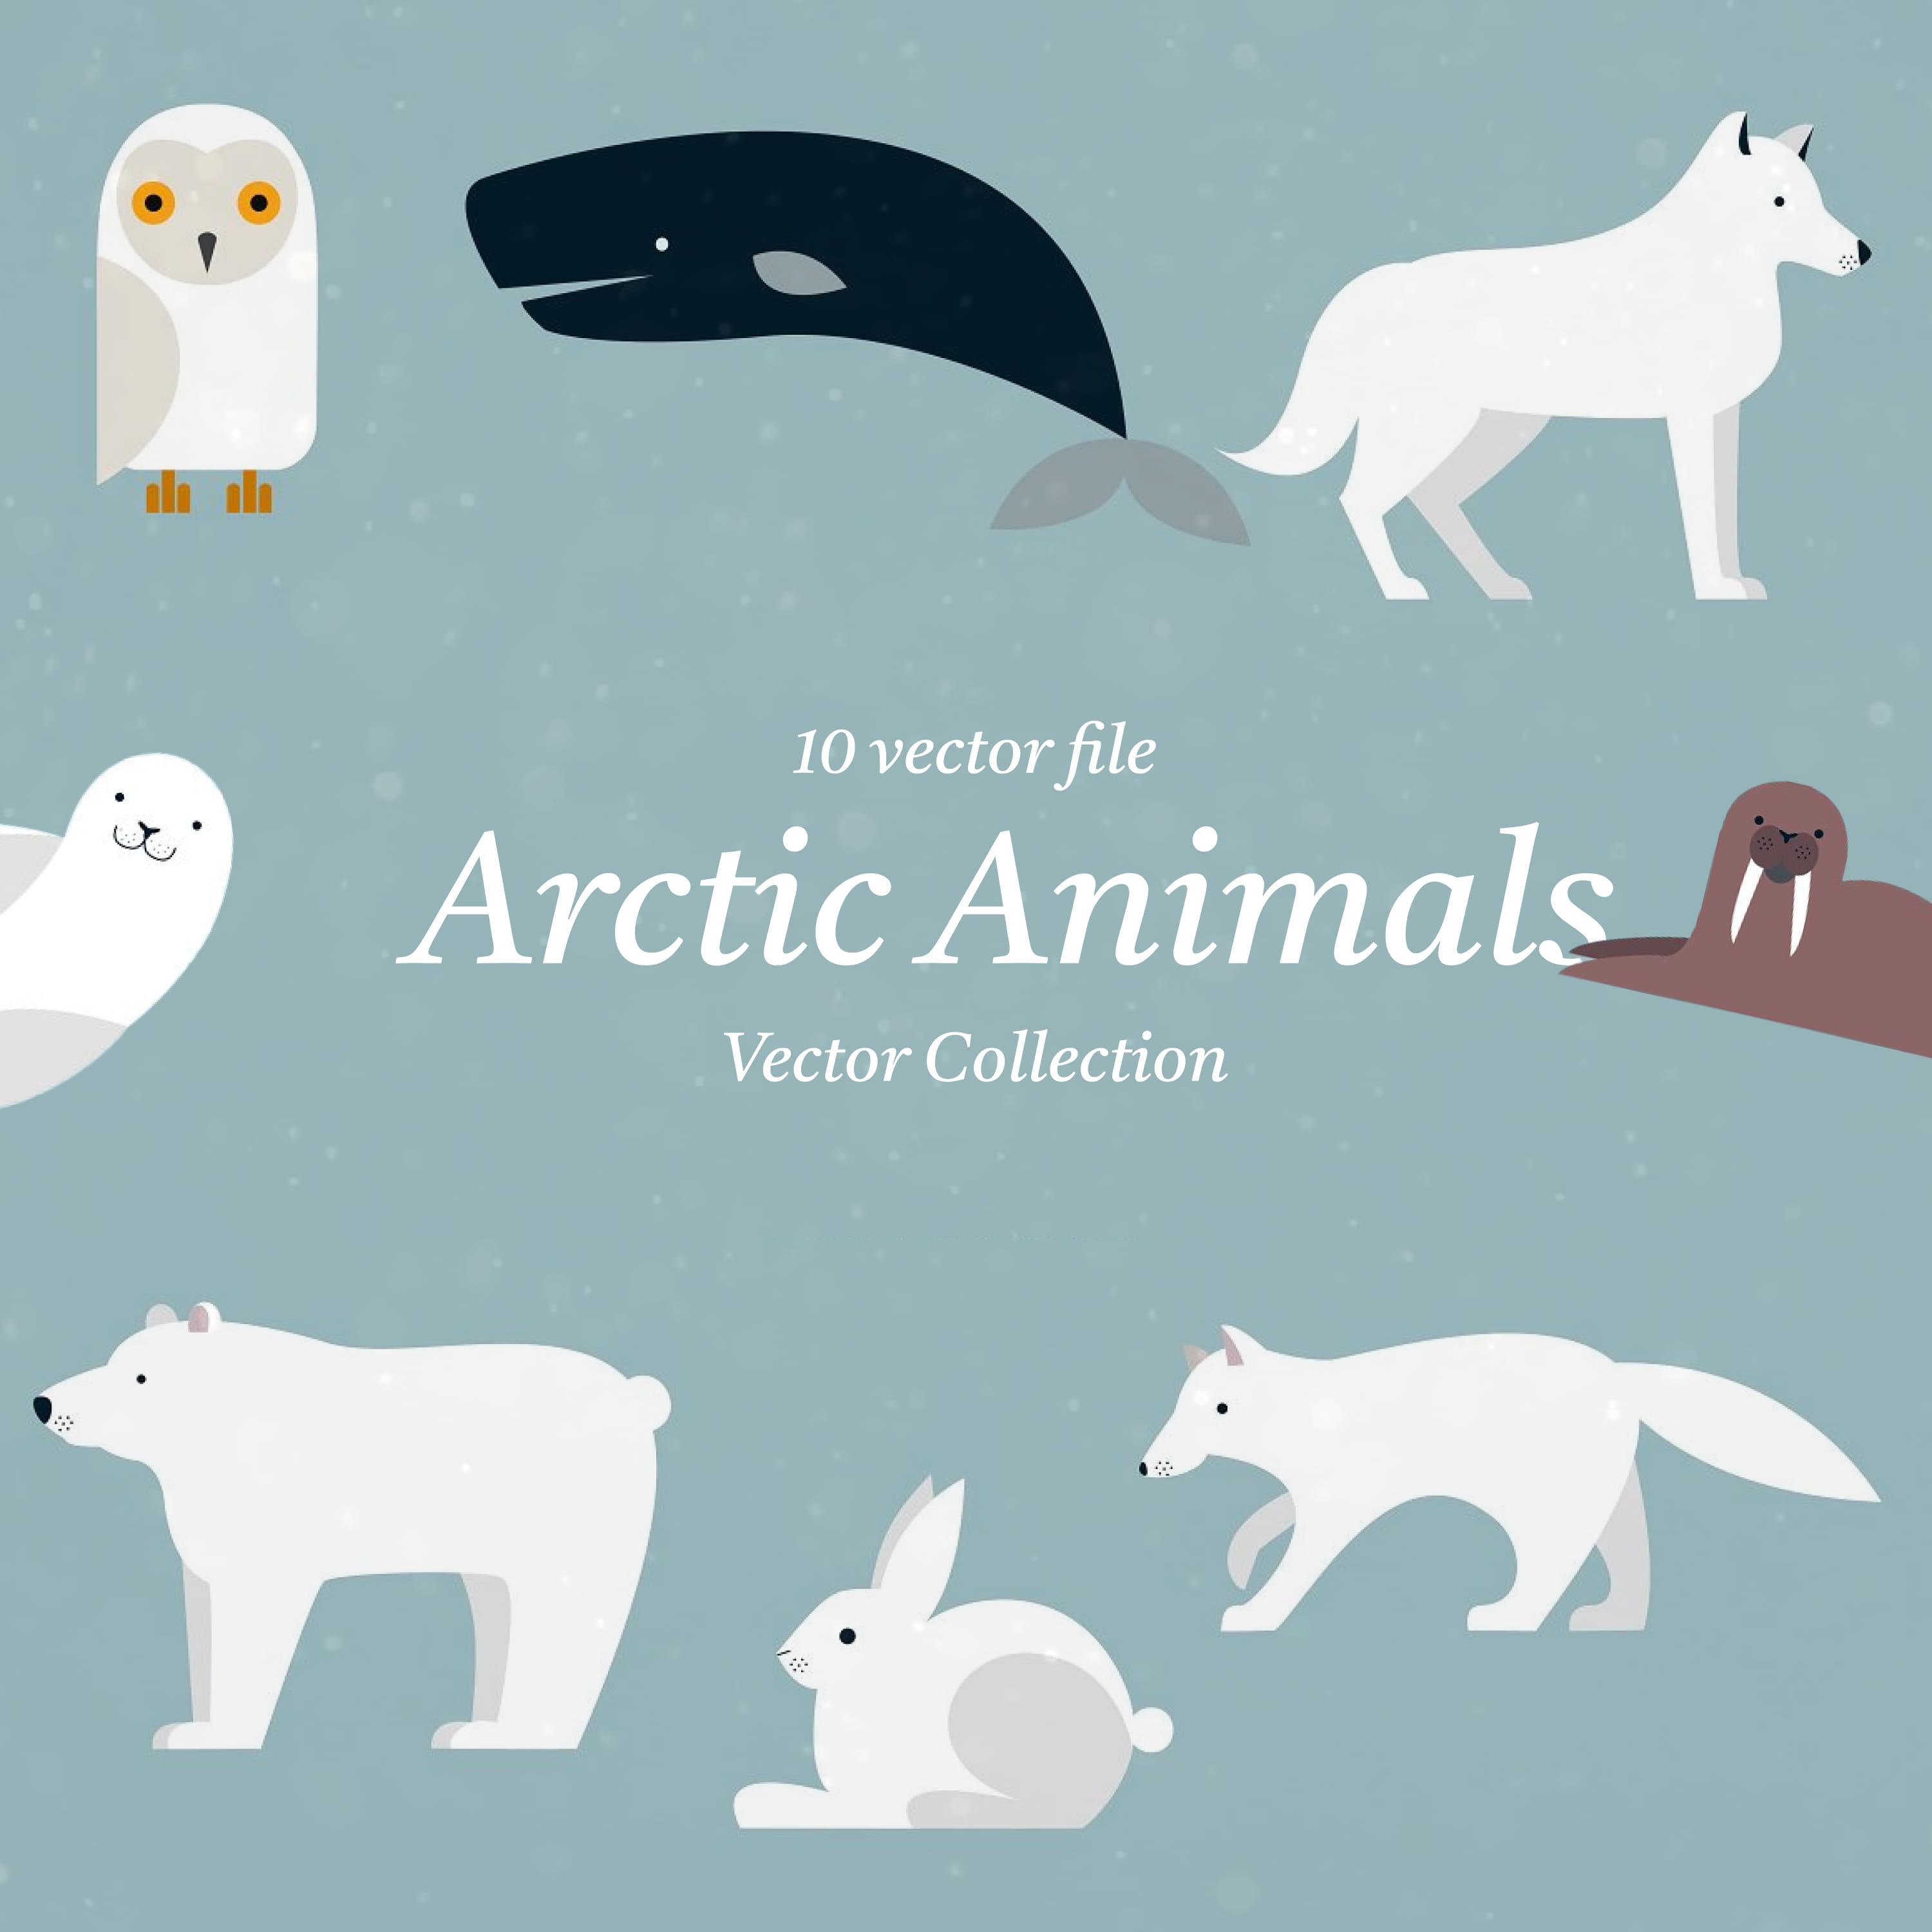 Arctic Animals Vector Collection cover.